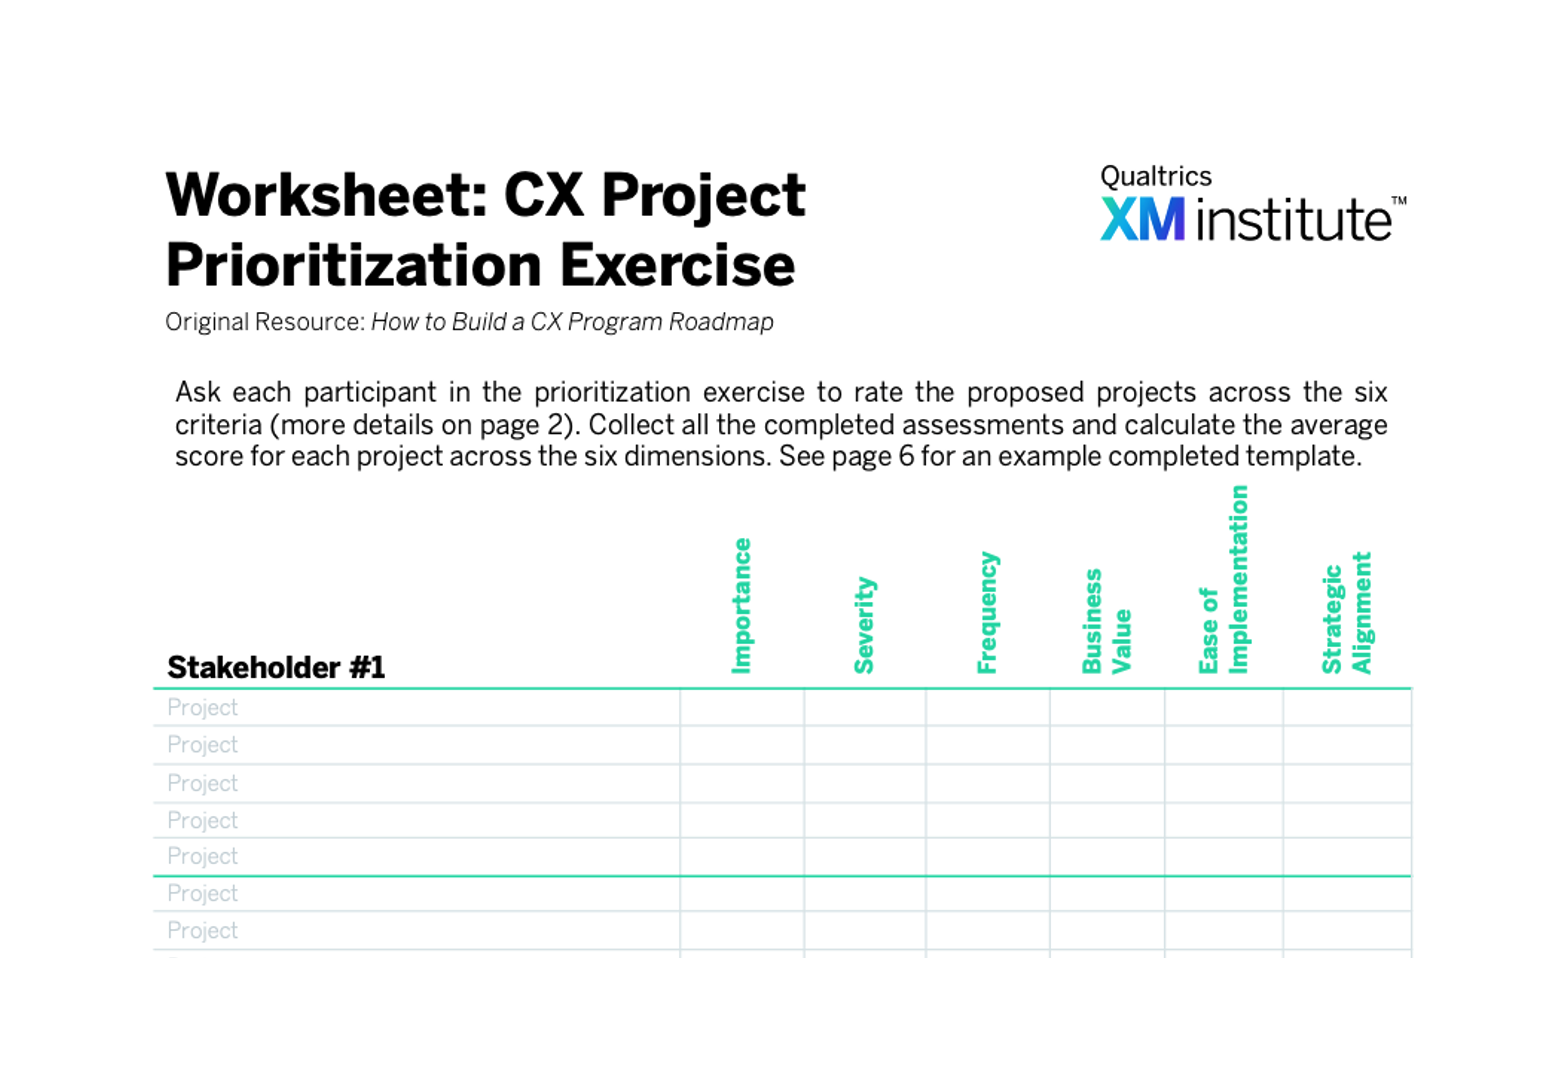 Worksheet: CX Project Prioritization Exercise